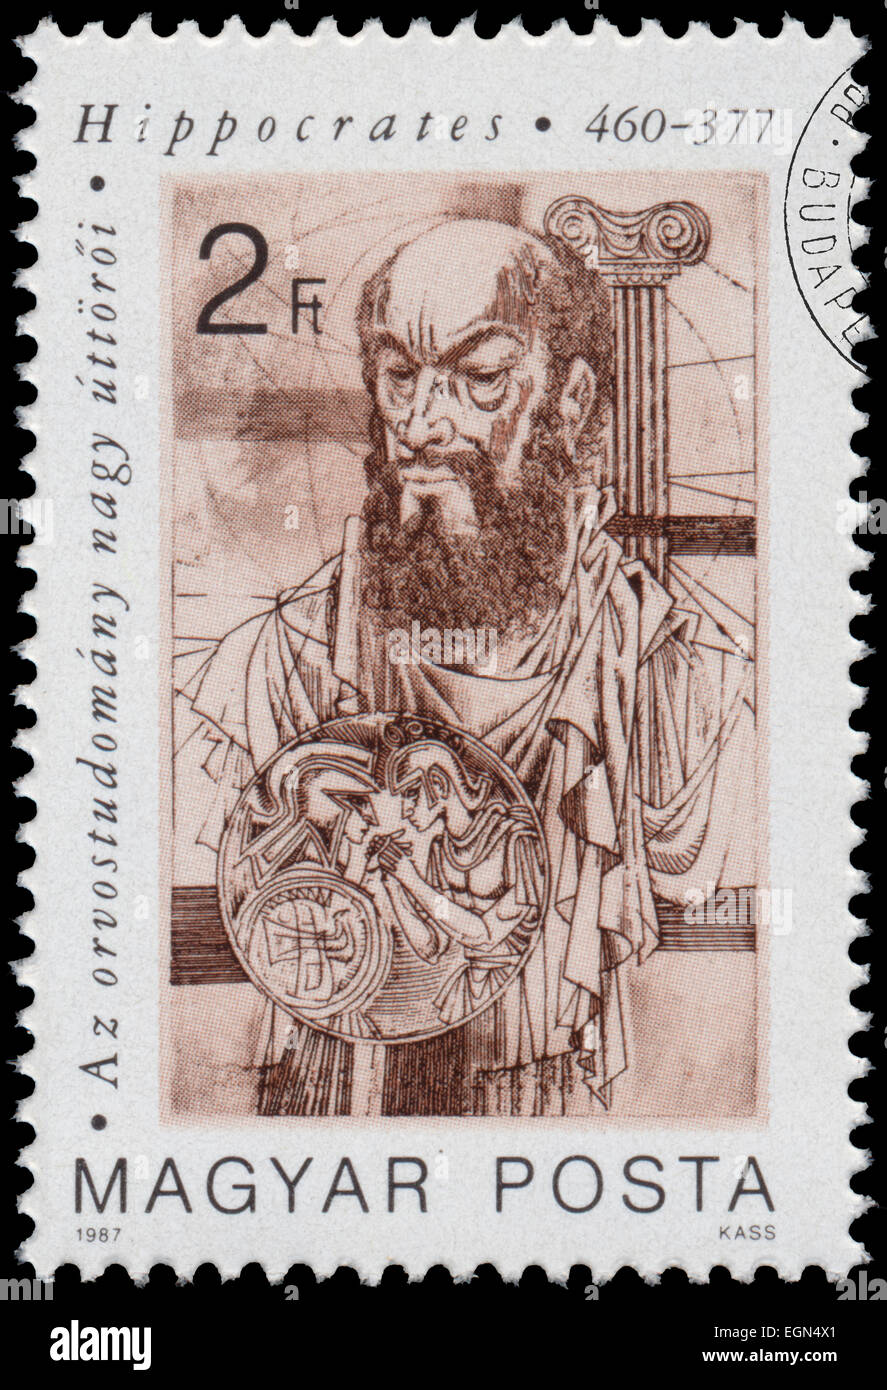 HUNGARY - CIRCA 1987: Stamp printed in Hungary shows Medical Pioneers - Hippocrates (460-377), circa 1987 Stock Photo